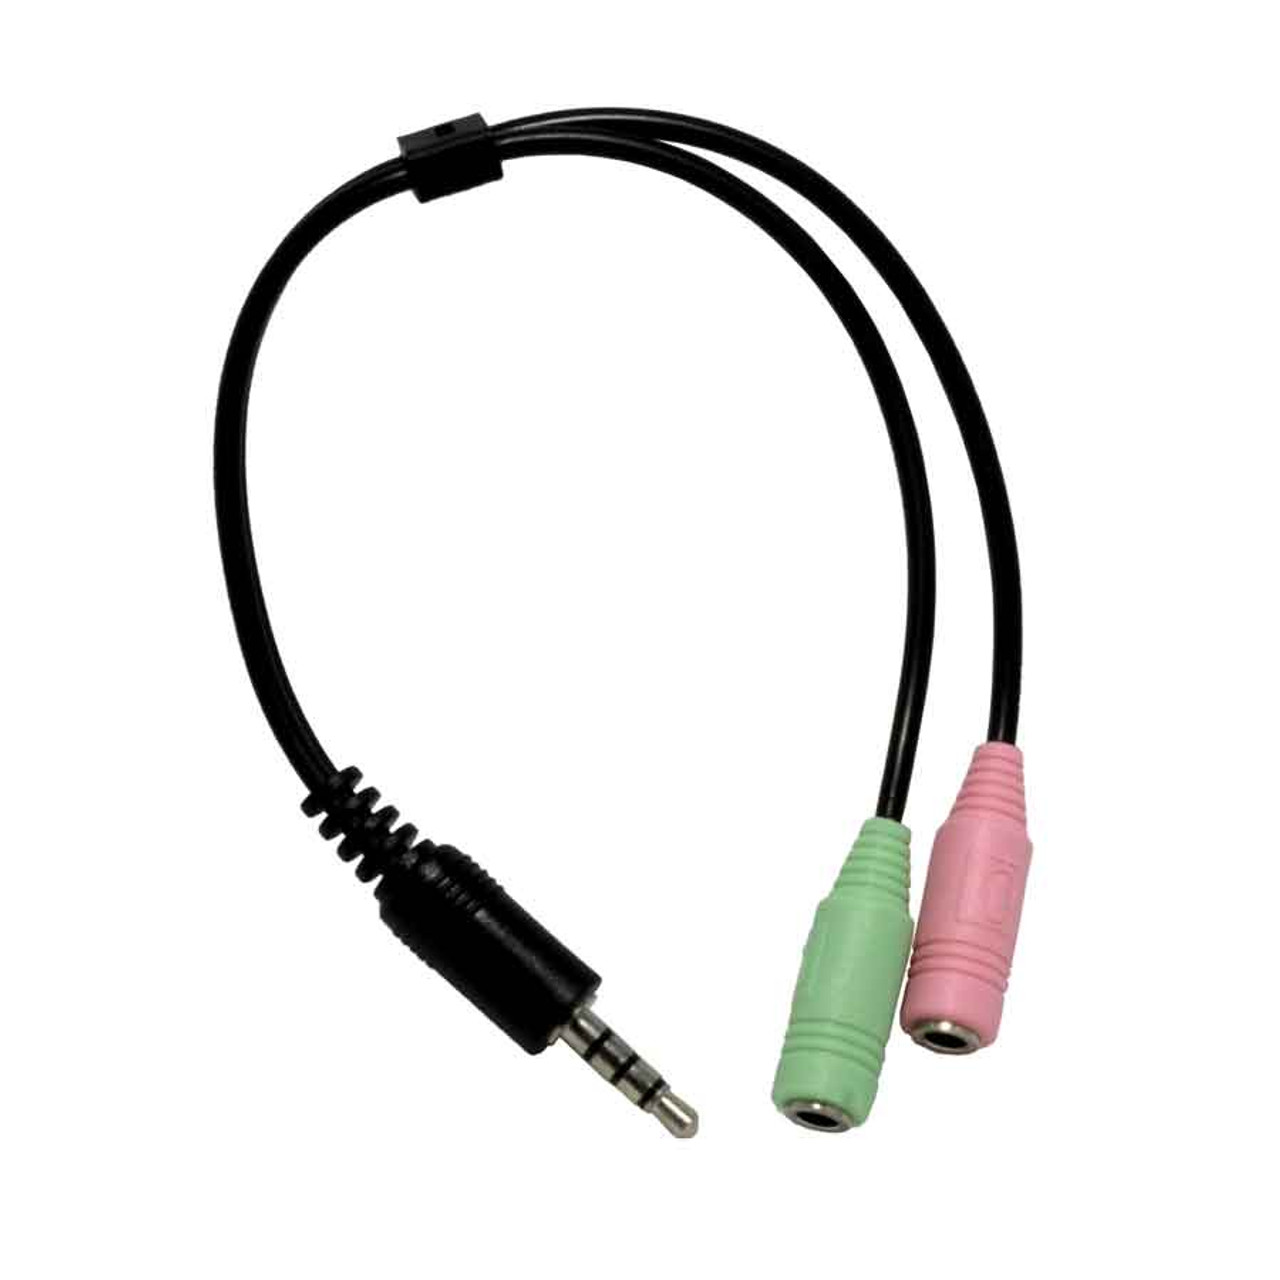 Connect Headset Audio & Mic Plugs into Jack of Tablet or Mobile Phone